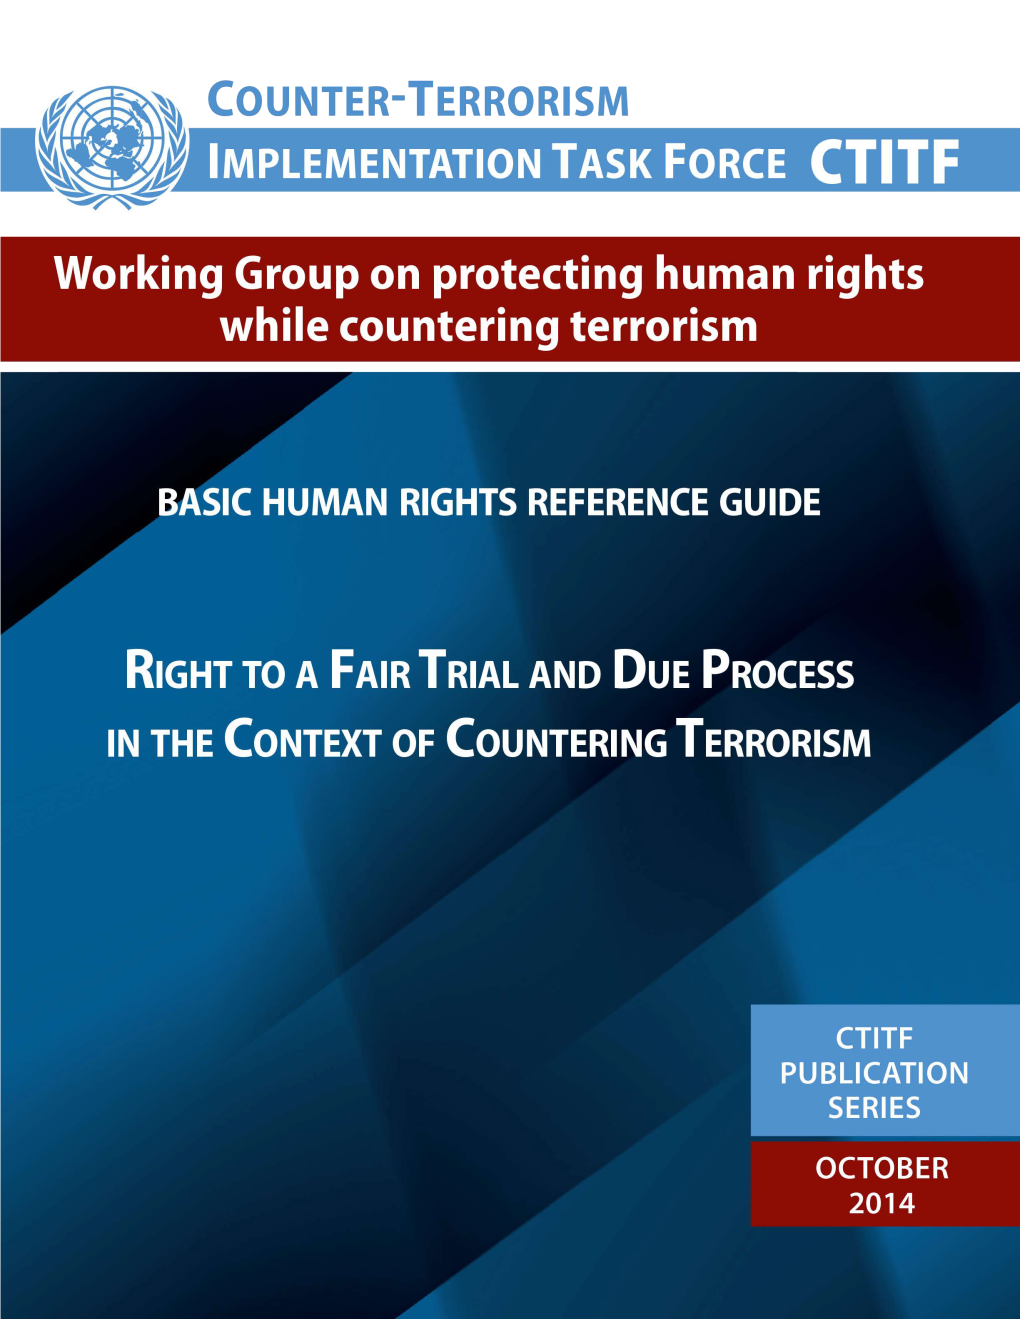 Right to a Fair Trial and Due Process in the Context of Countering Terrorism